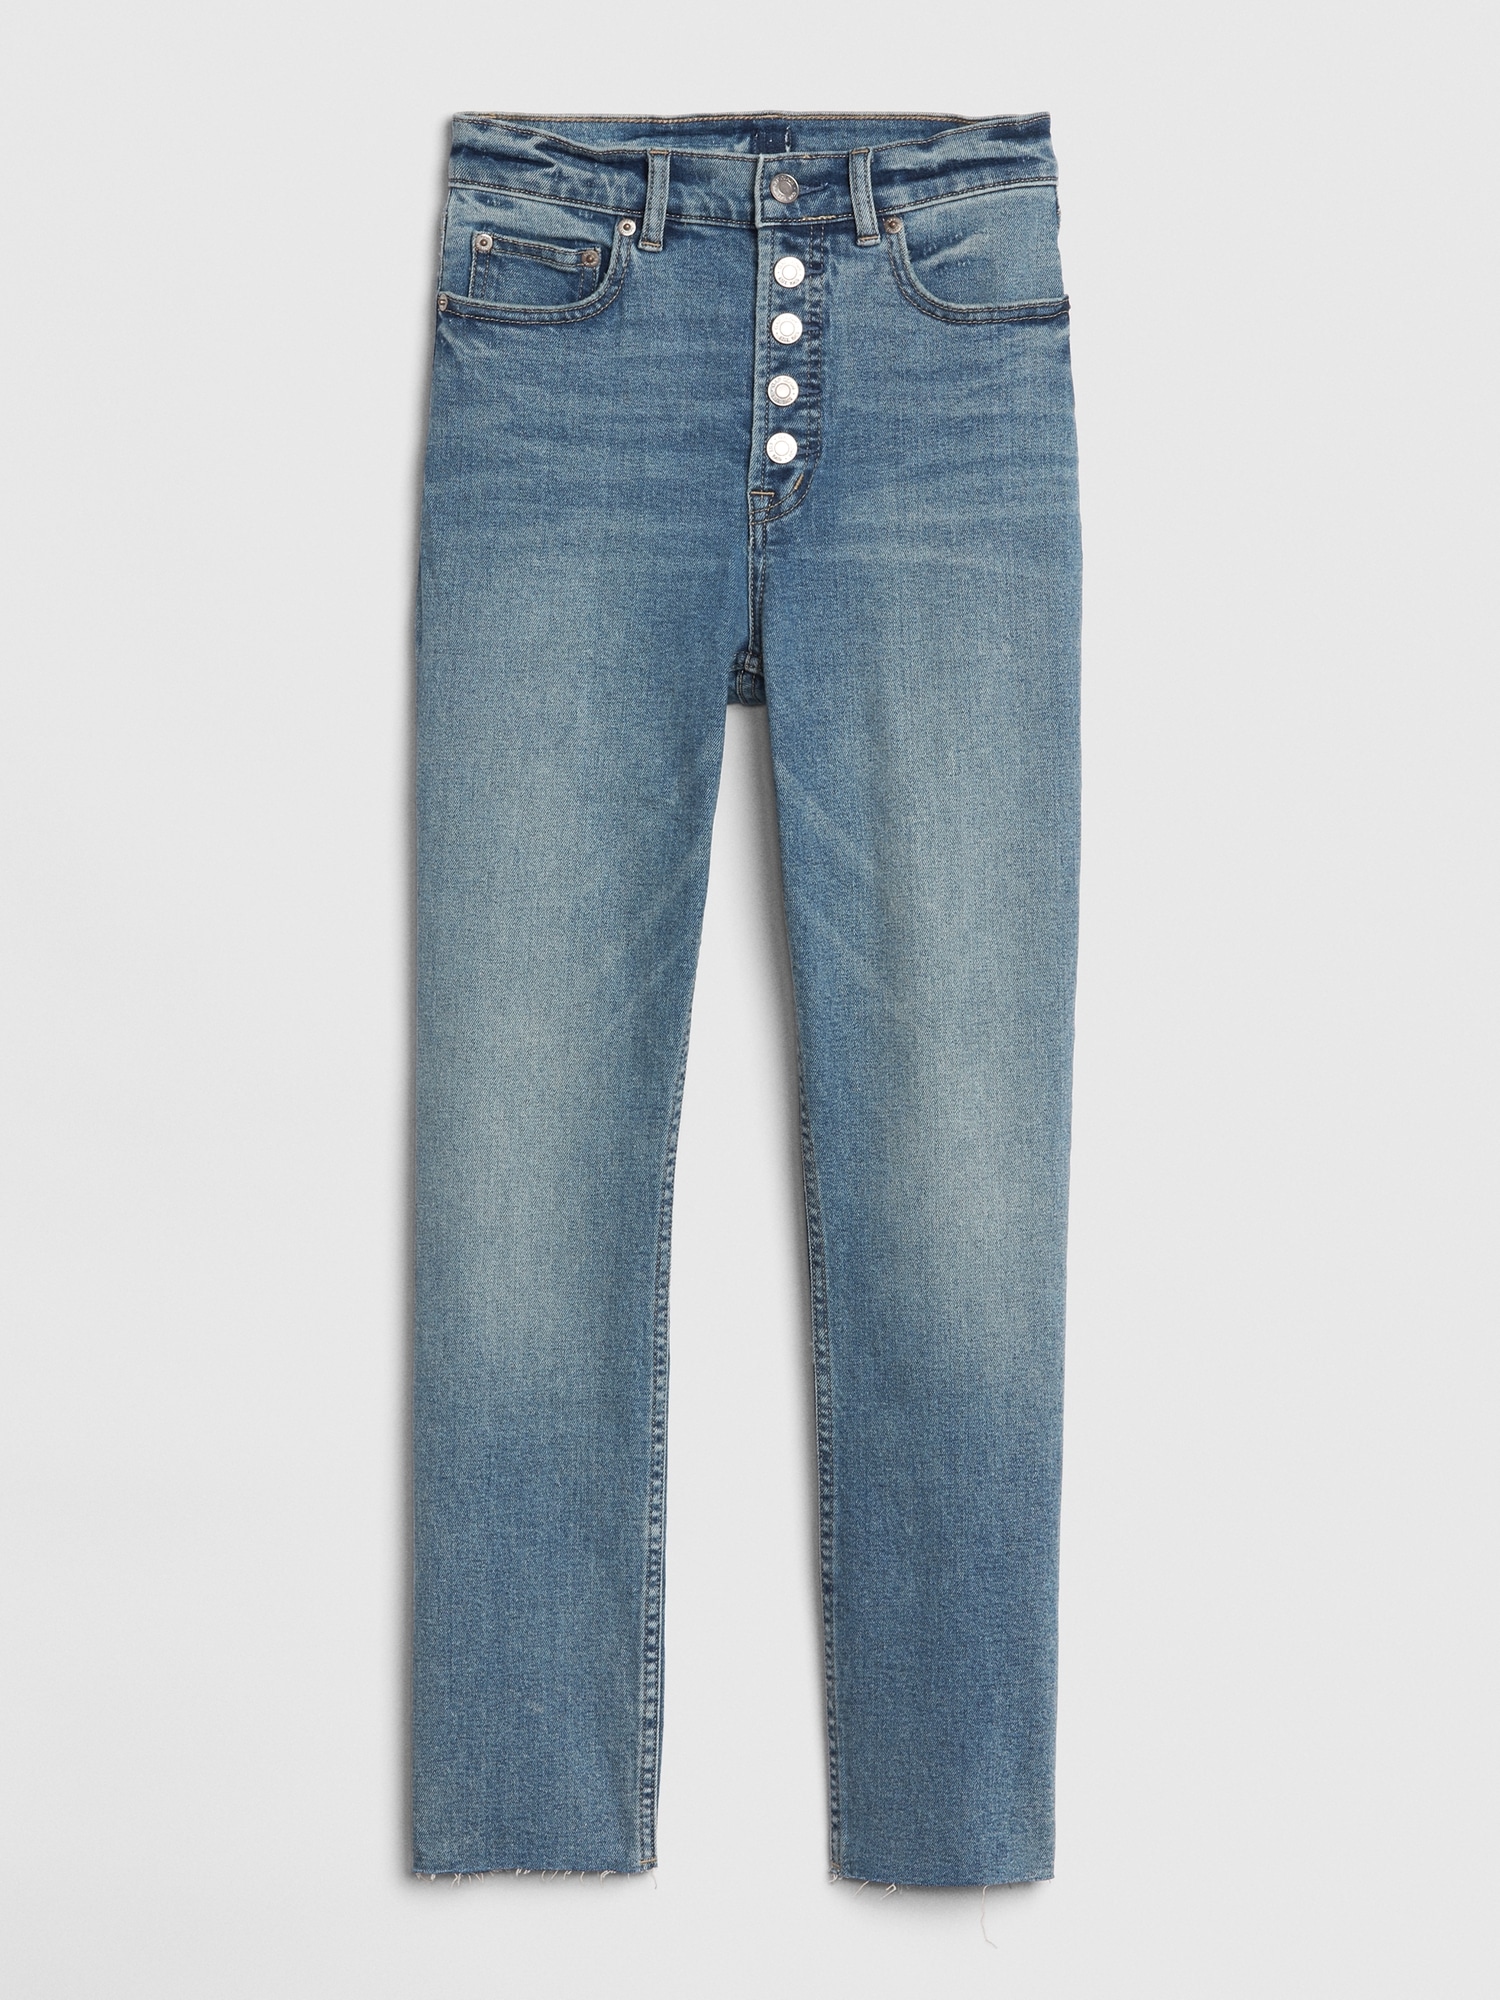 gap button fly womens jeans